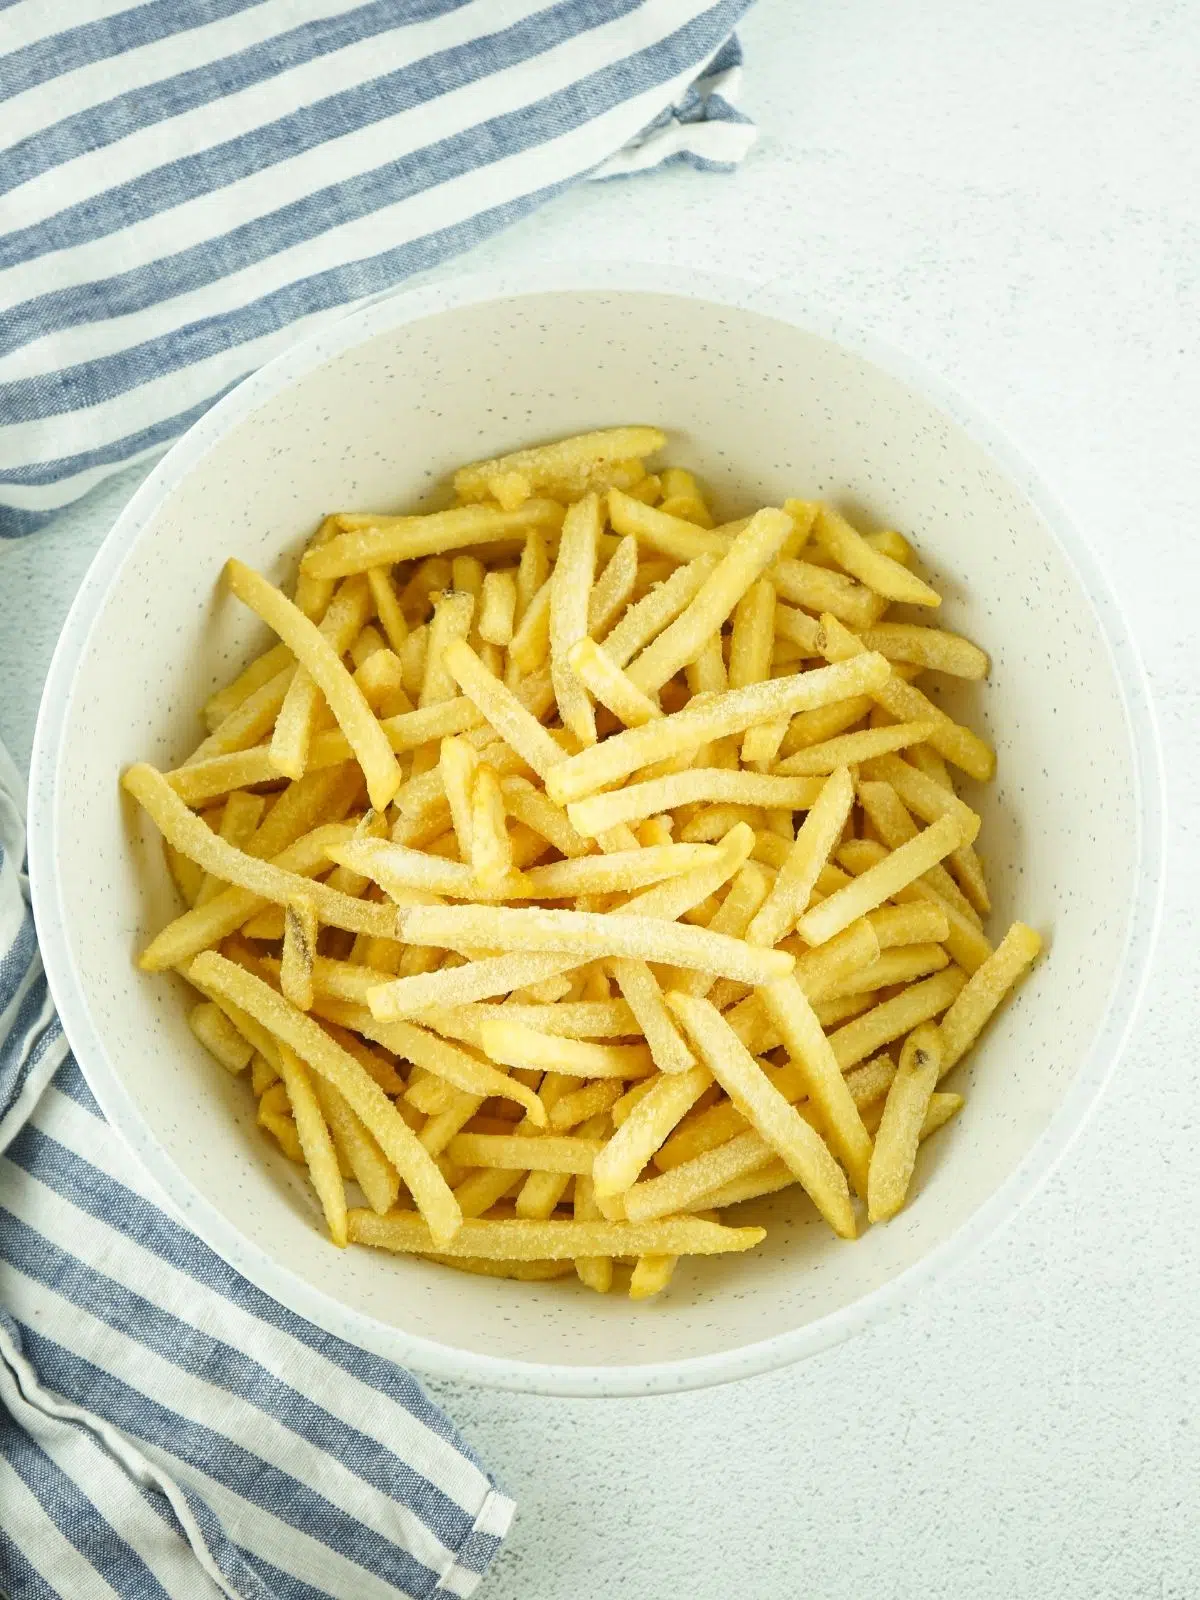 frozen French fries in bowl.